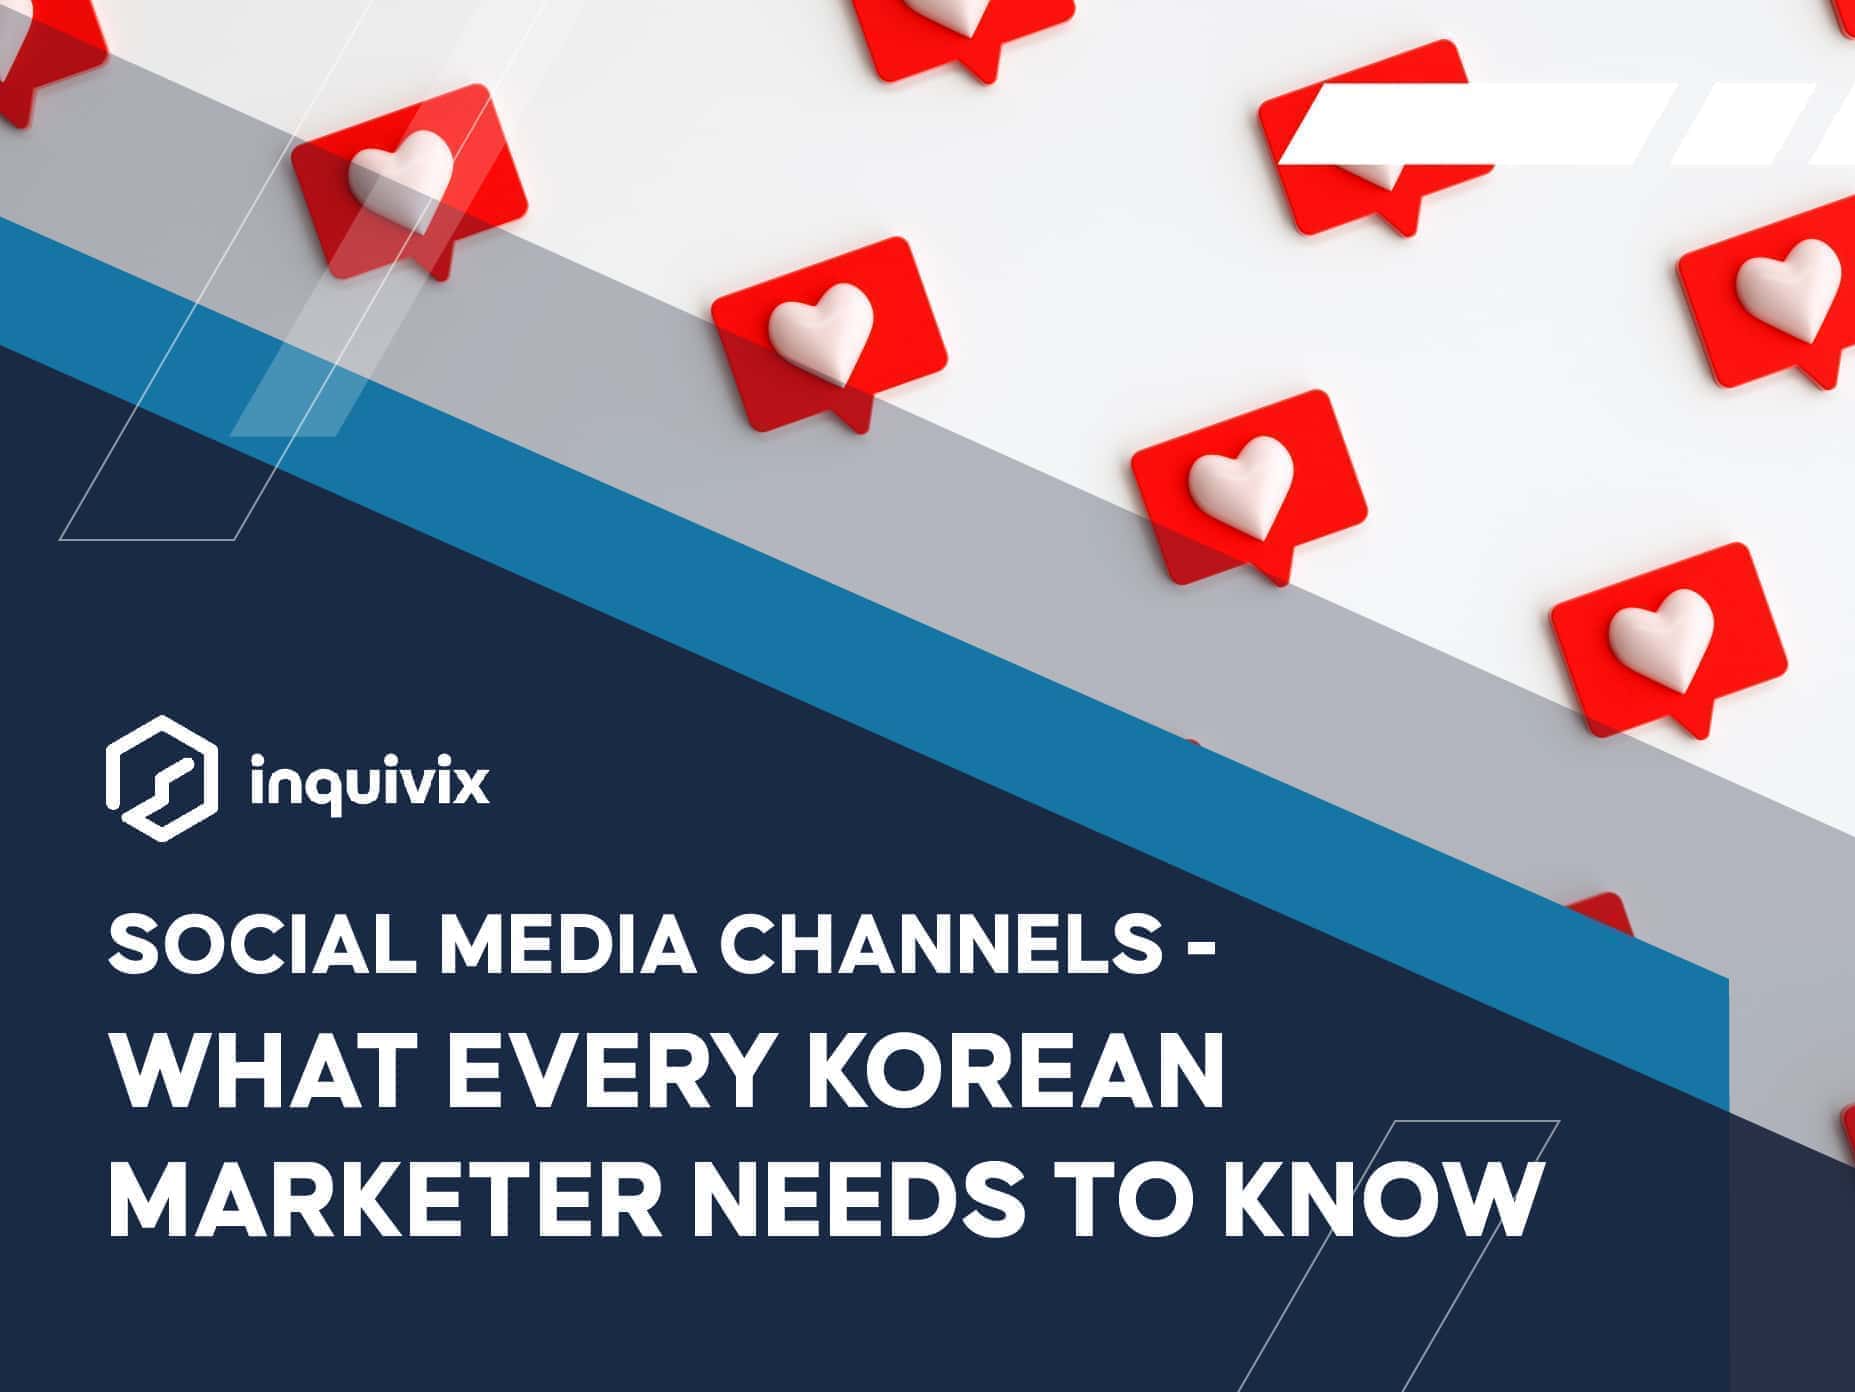 WHAT EVERY KOREAN MARKETER NEEDS TO KNOW